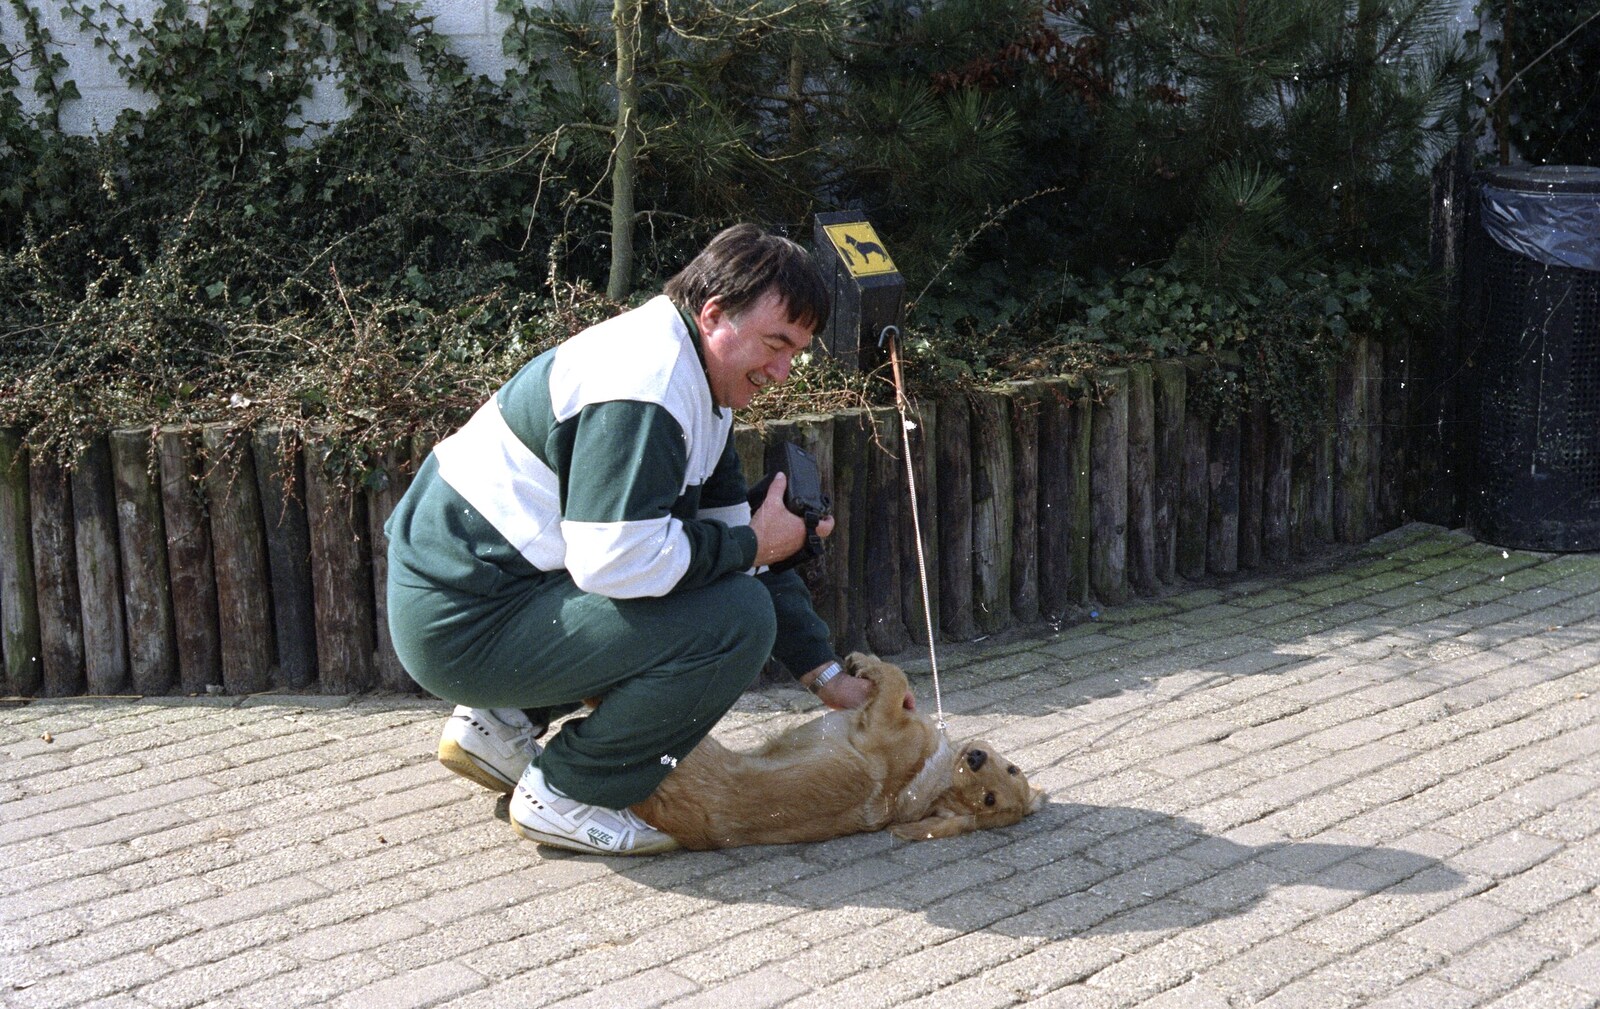 A Trip to Center Parcs, Eemhof, Netherlands - 24th March 1992: Corky gives a belly scratch to a passing hound